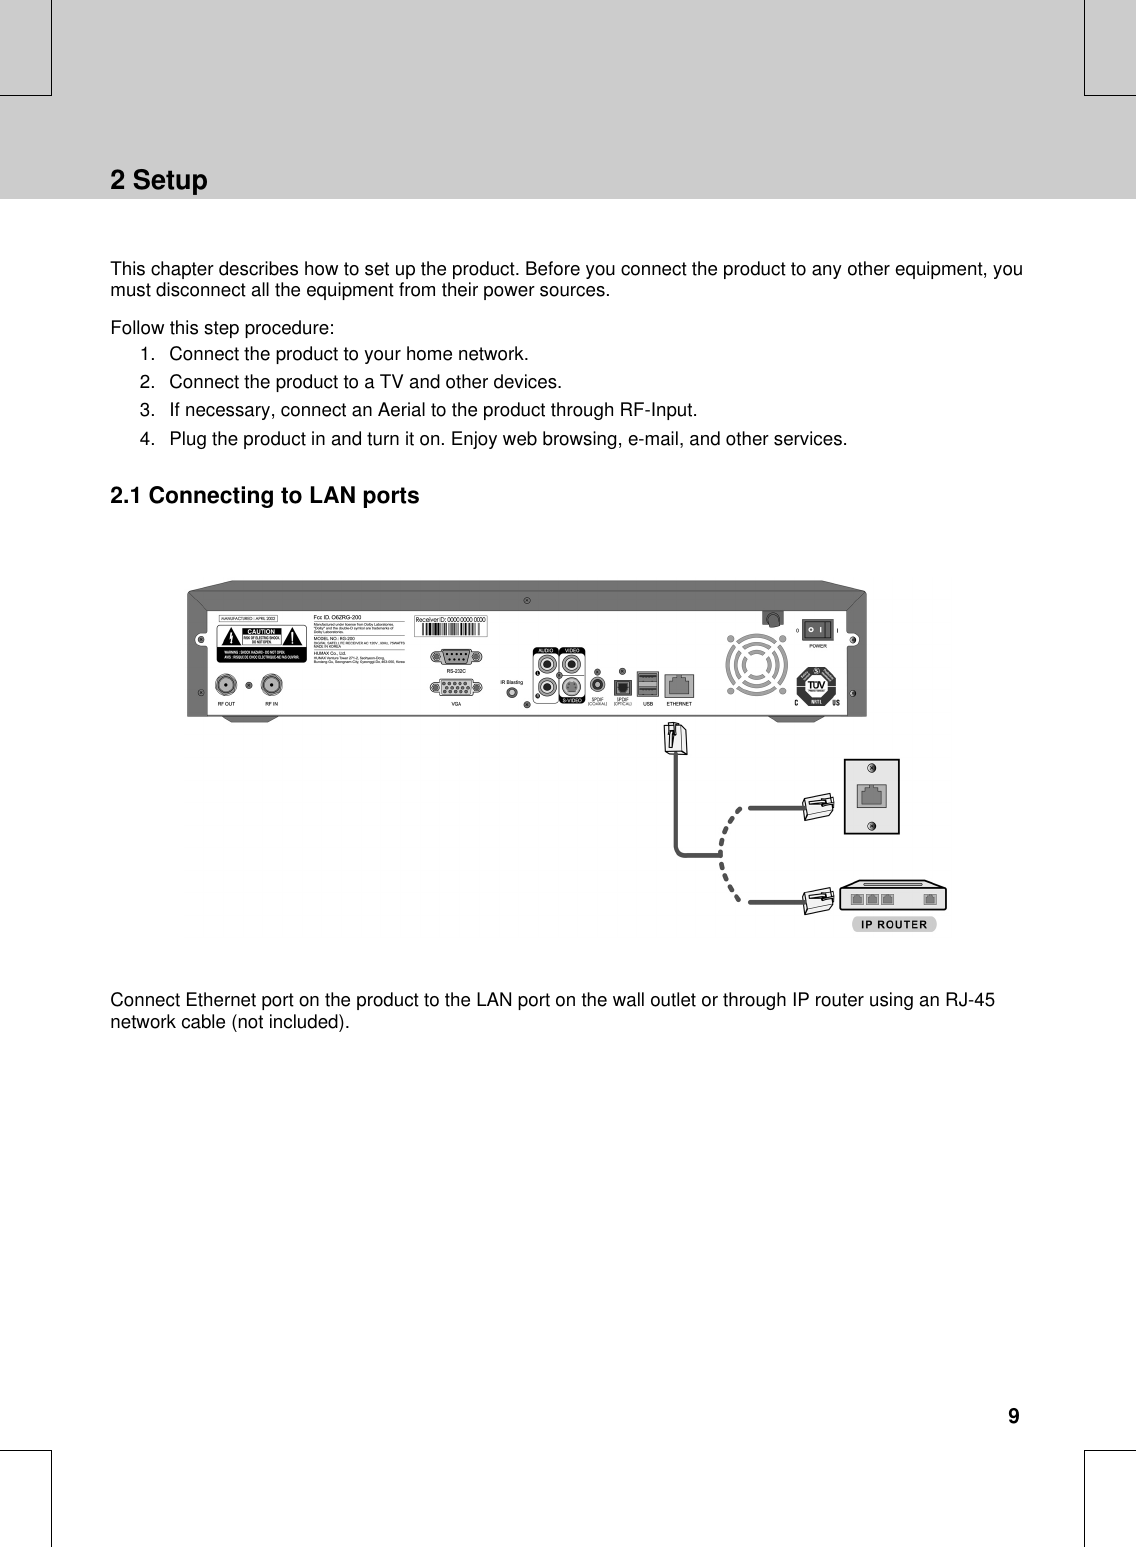 **This chapter describes how to set up the product. Before you connect the product to any other equipment, youmust disconnect all the equipment from their power sources.**Follow this step procedure:1. Connect the product to your home network.2. Connect the product to a TV and other devices.3. If necessary, connect an Aerial to the product through RF-Input.4. Plug the product in and turn it on. Enjoy web browsing, e-mail, and other services.2.1 Connecting to LAN ports****Connect Ethernet port on the product to the LAN port on the wall outlet or through IP router using an RJ-45network cable (not included).**2 Setup9****************************